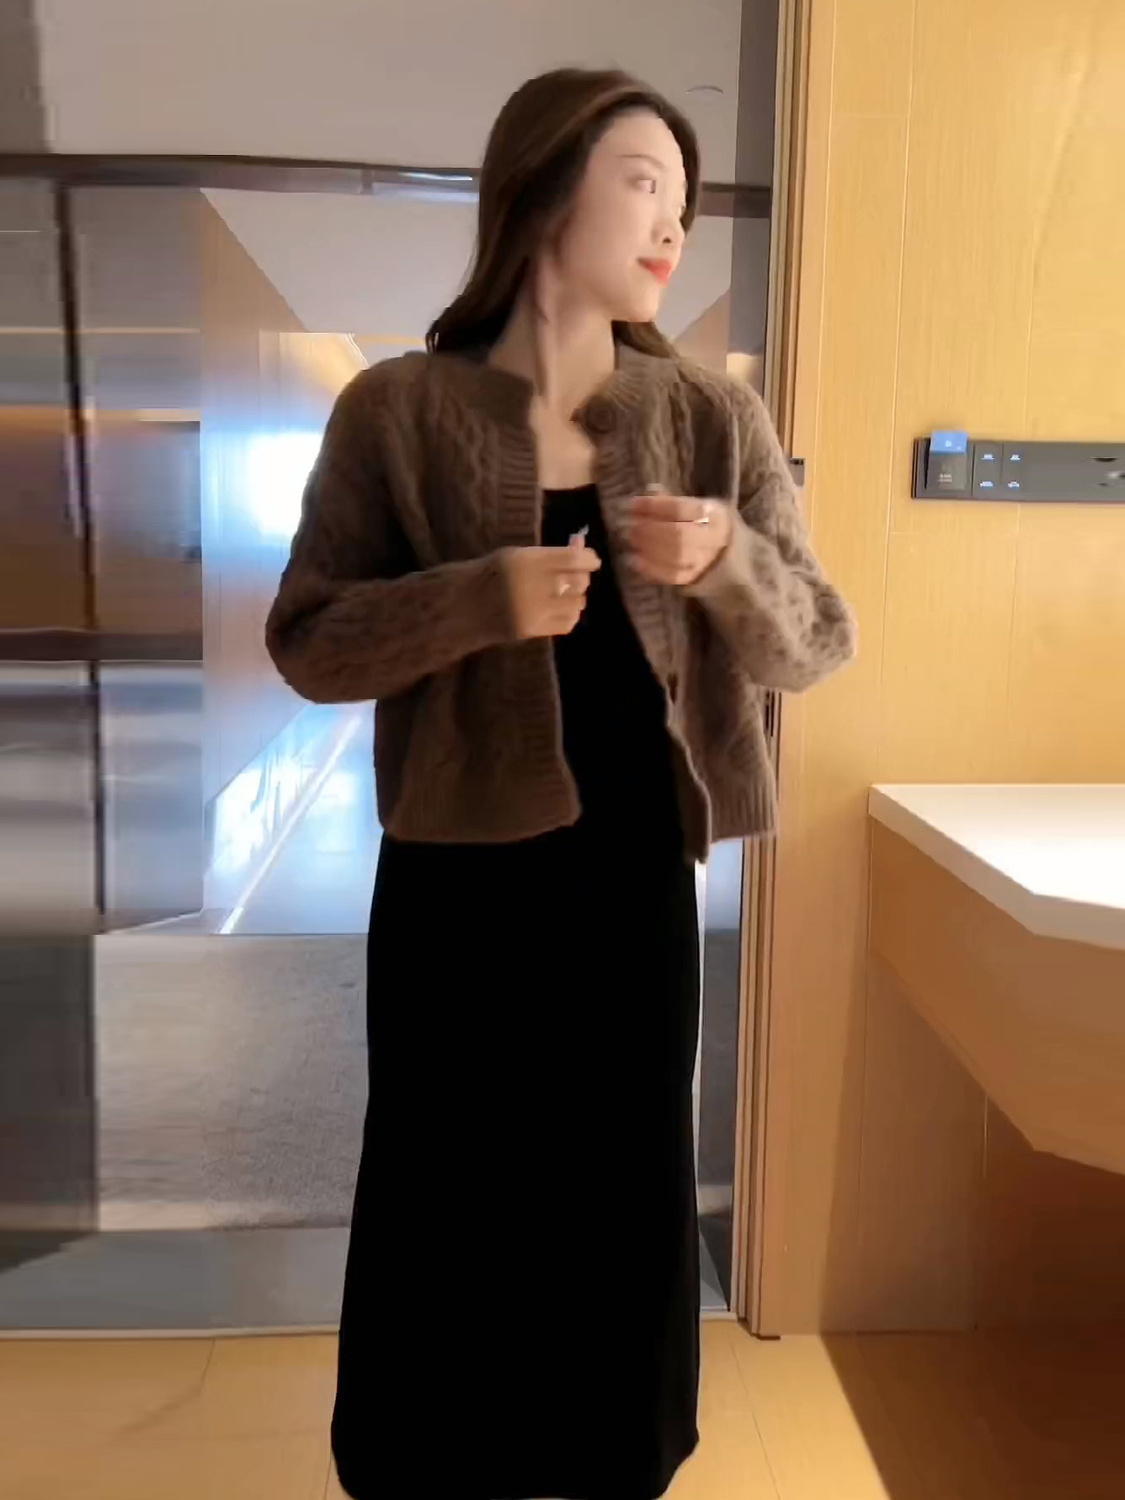  spring new solid color suit fashion long-sleeved button cardigan sweater and black skirt two-piece suit